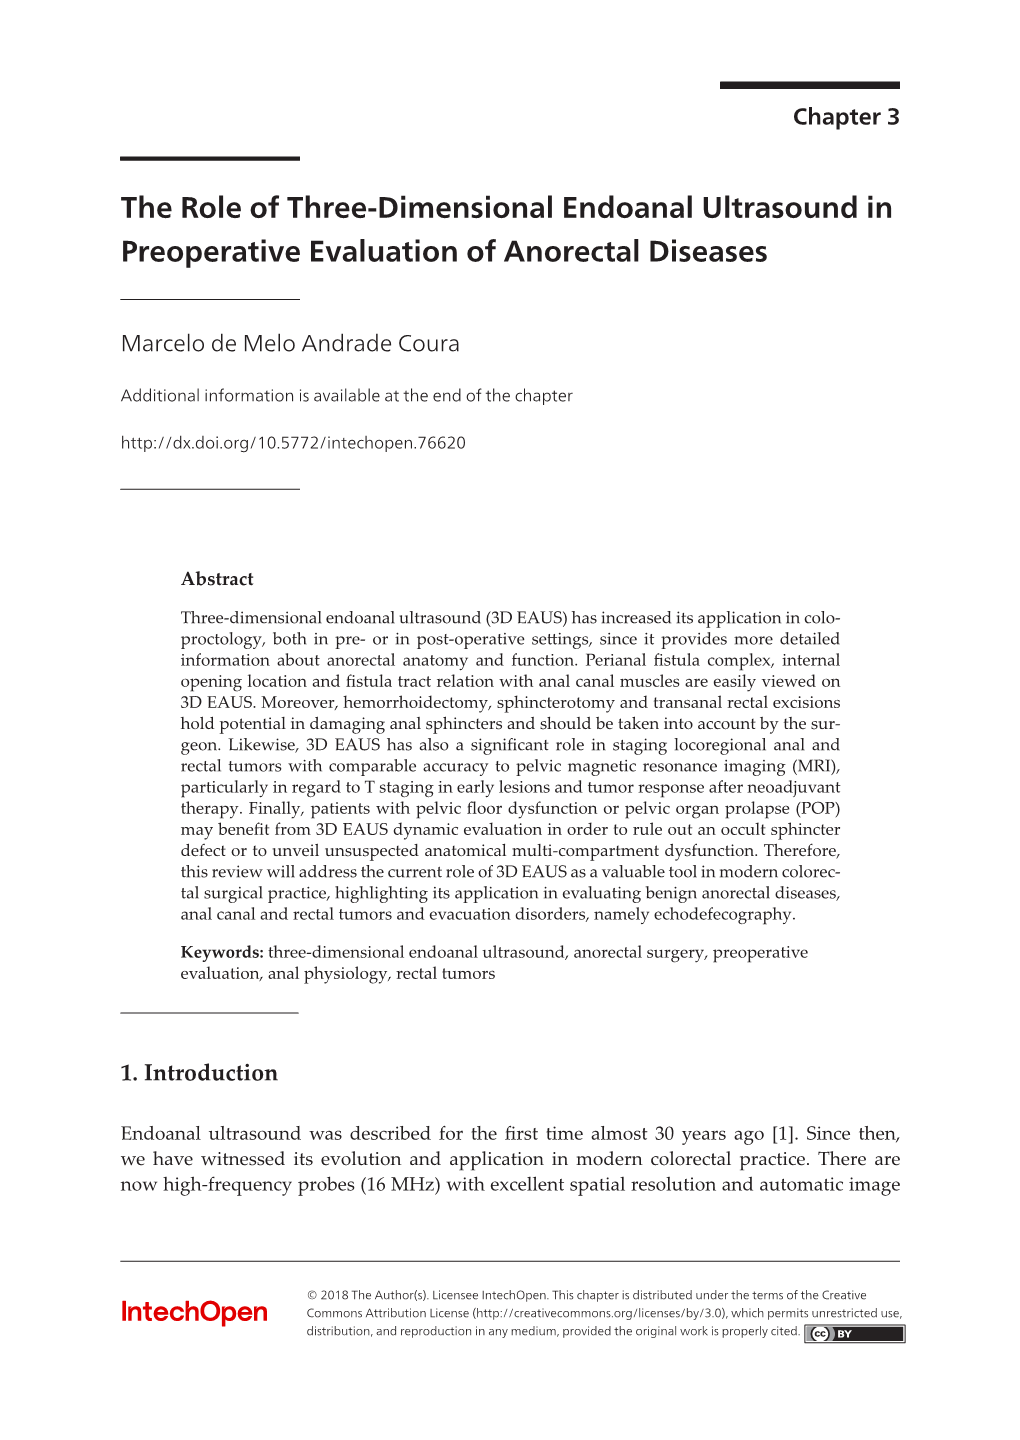 The Role of Three-Dimensional Endoanal Ultrasound in Preoperative Evaluation of Anorectal Diseases